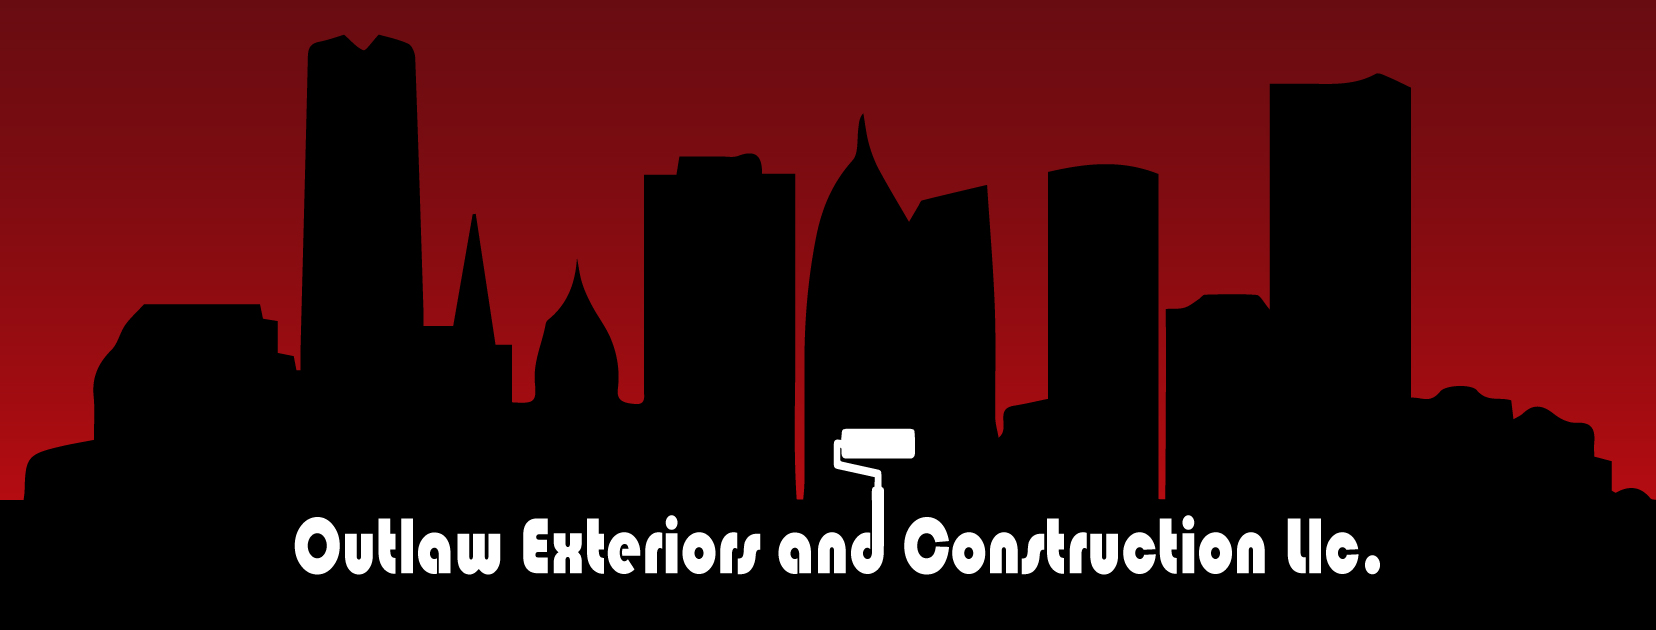 Outlaw Exteriors and Construction LLC